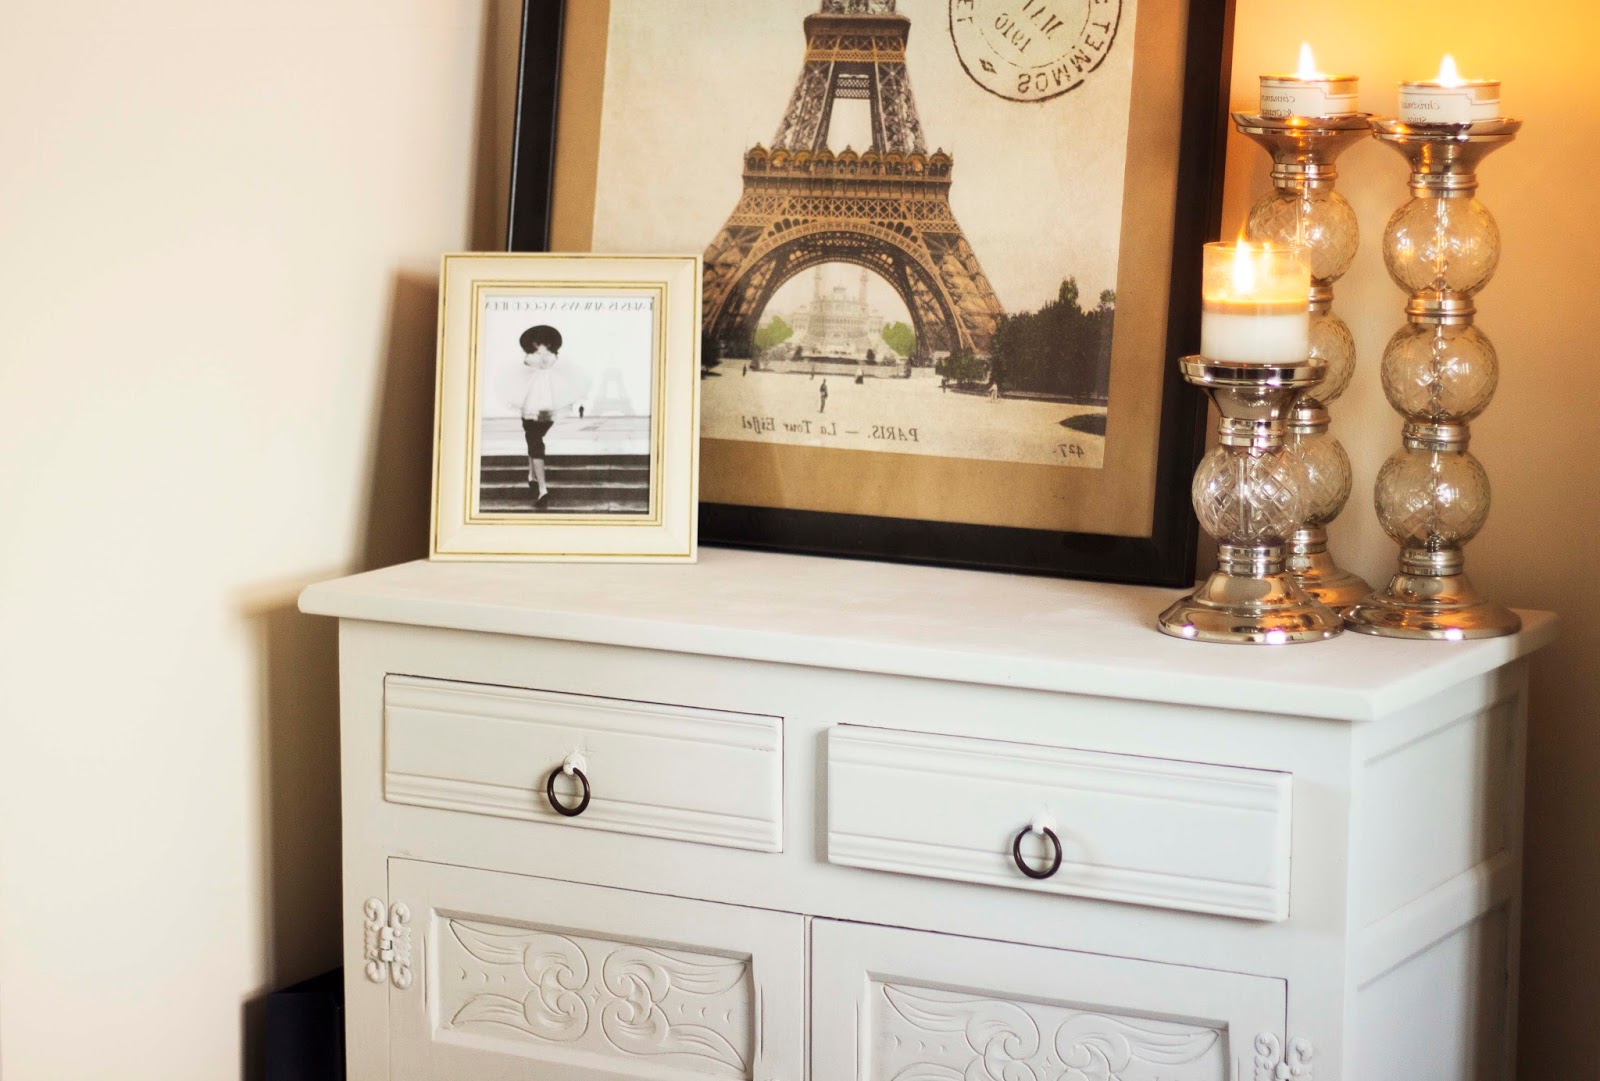 Upcycling a Wooden Cabinet with Rust-Oleum Furniture Paint